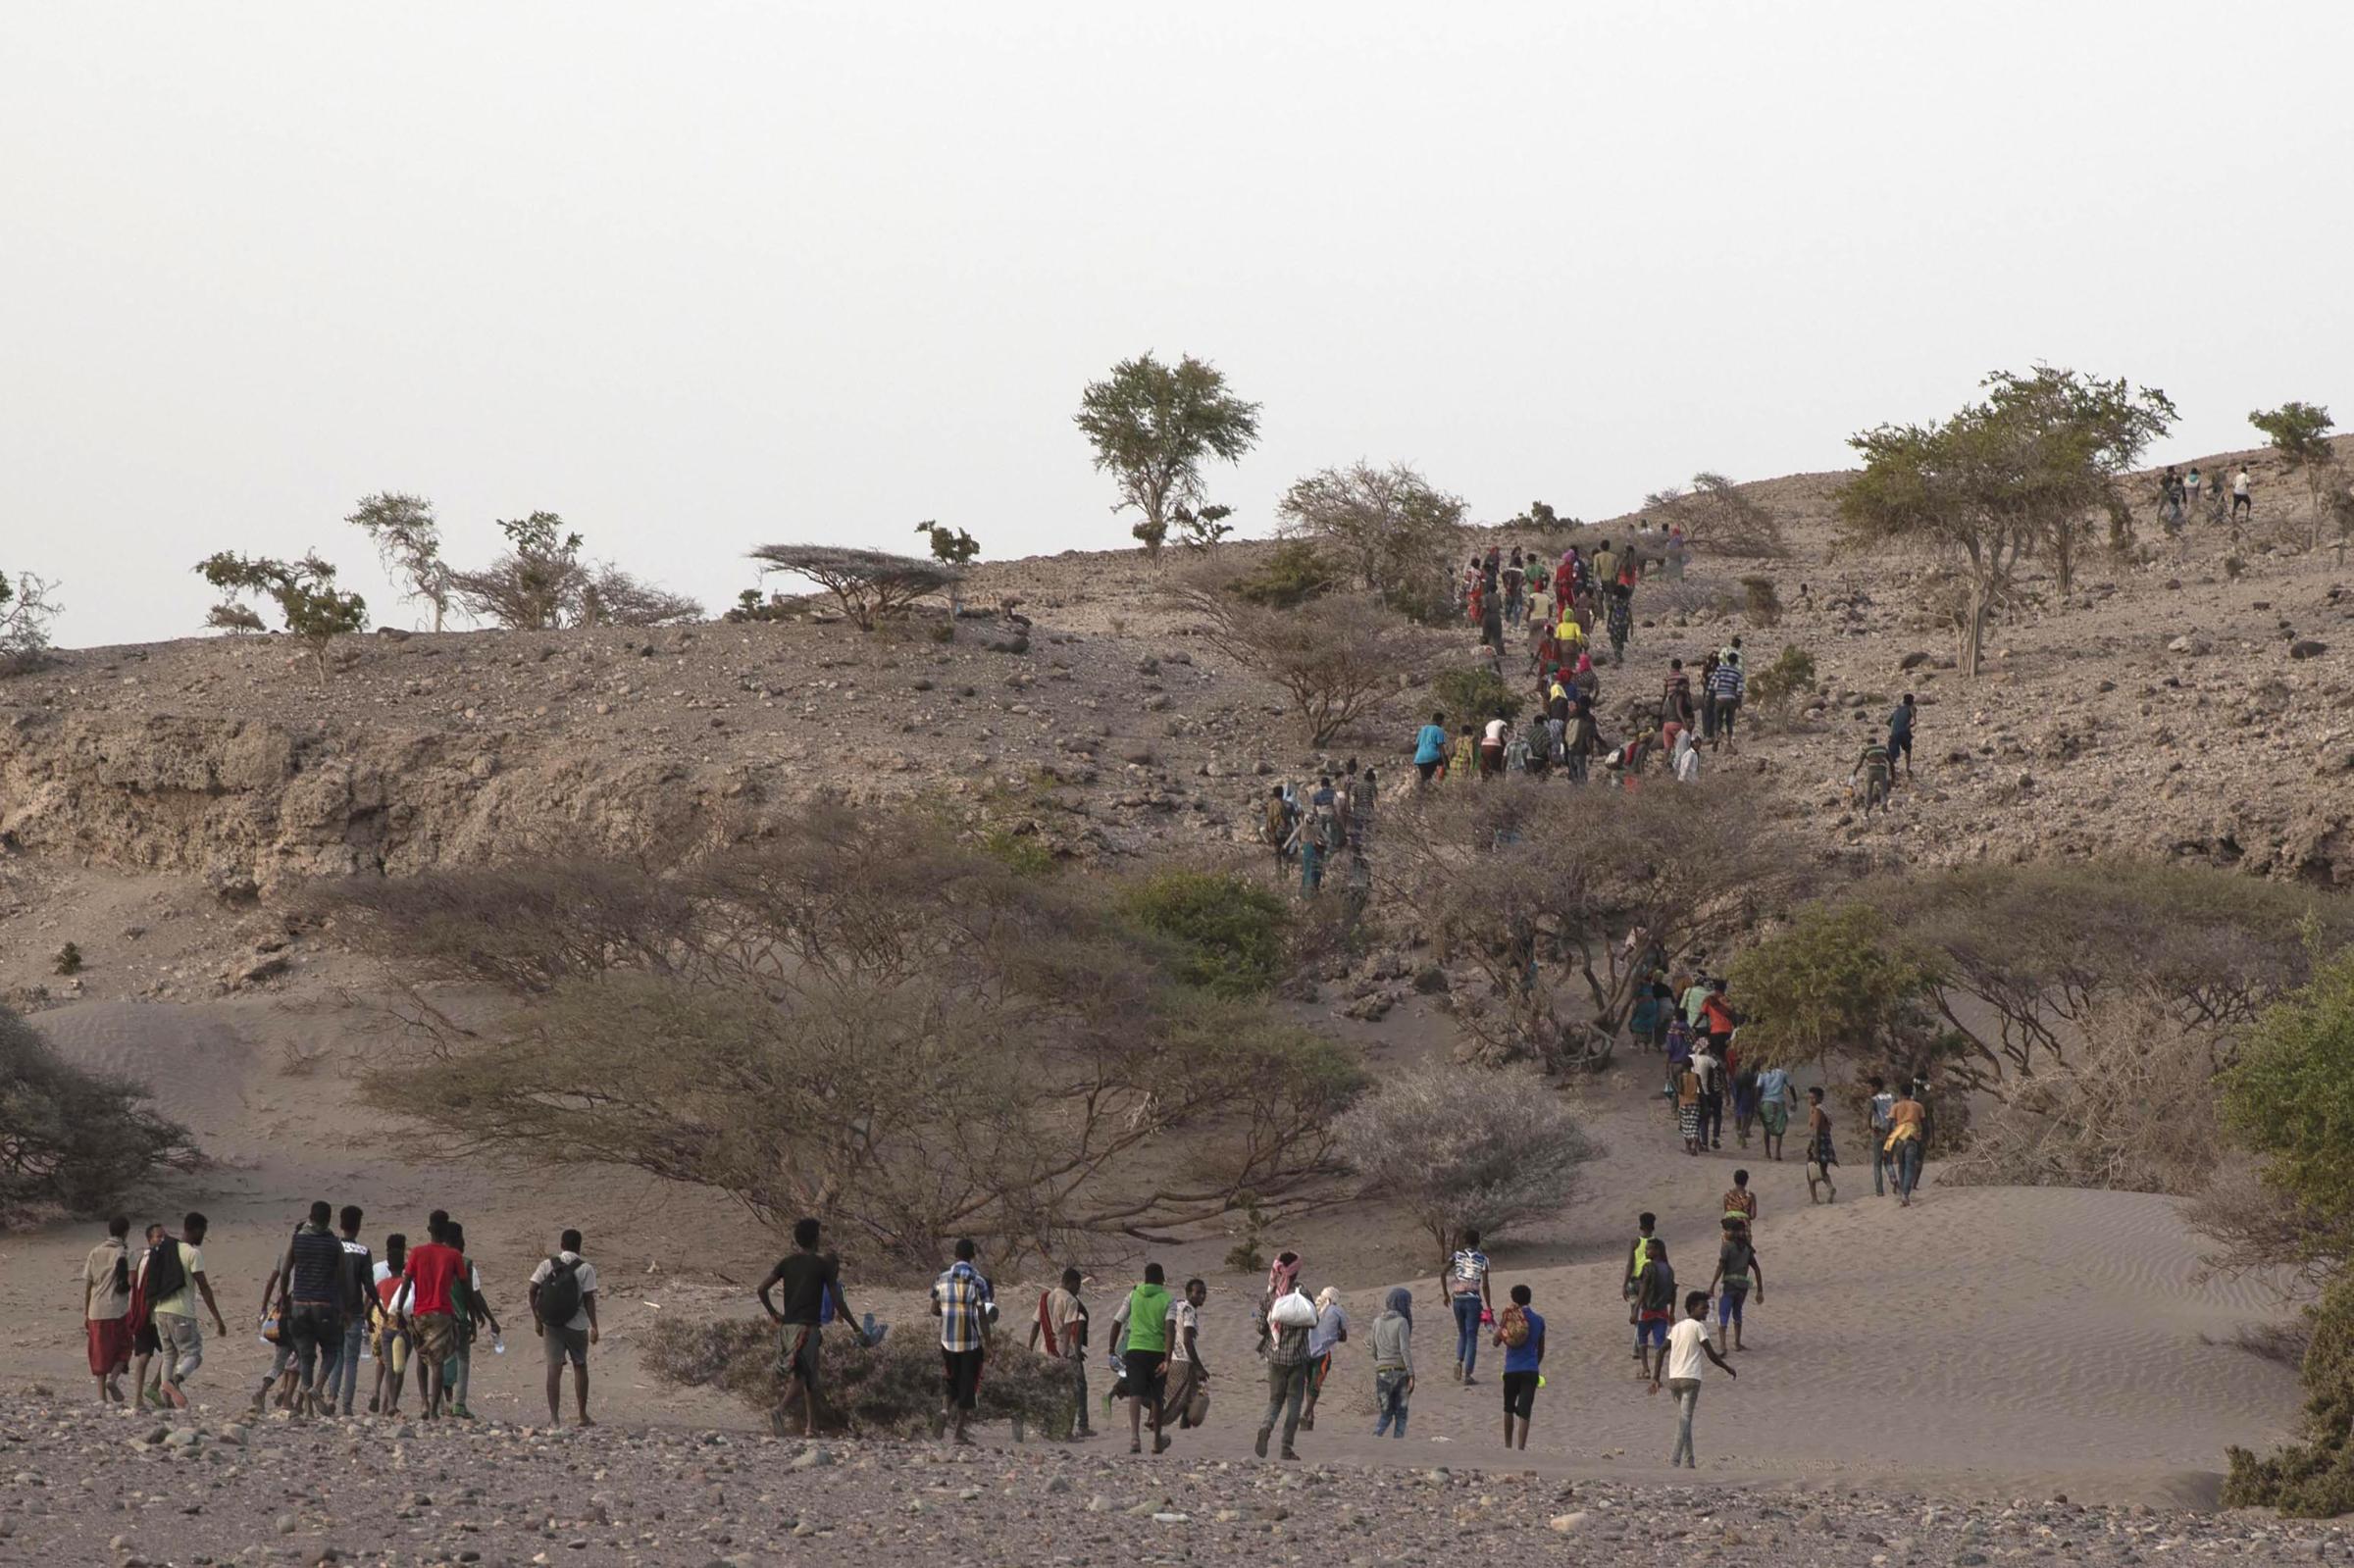  Long lines of migrants descend single file down mountain slopes to the rocky coastal plain, where many lay eyes on the sea for first time, and eventually board the boats. 